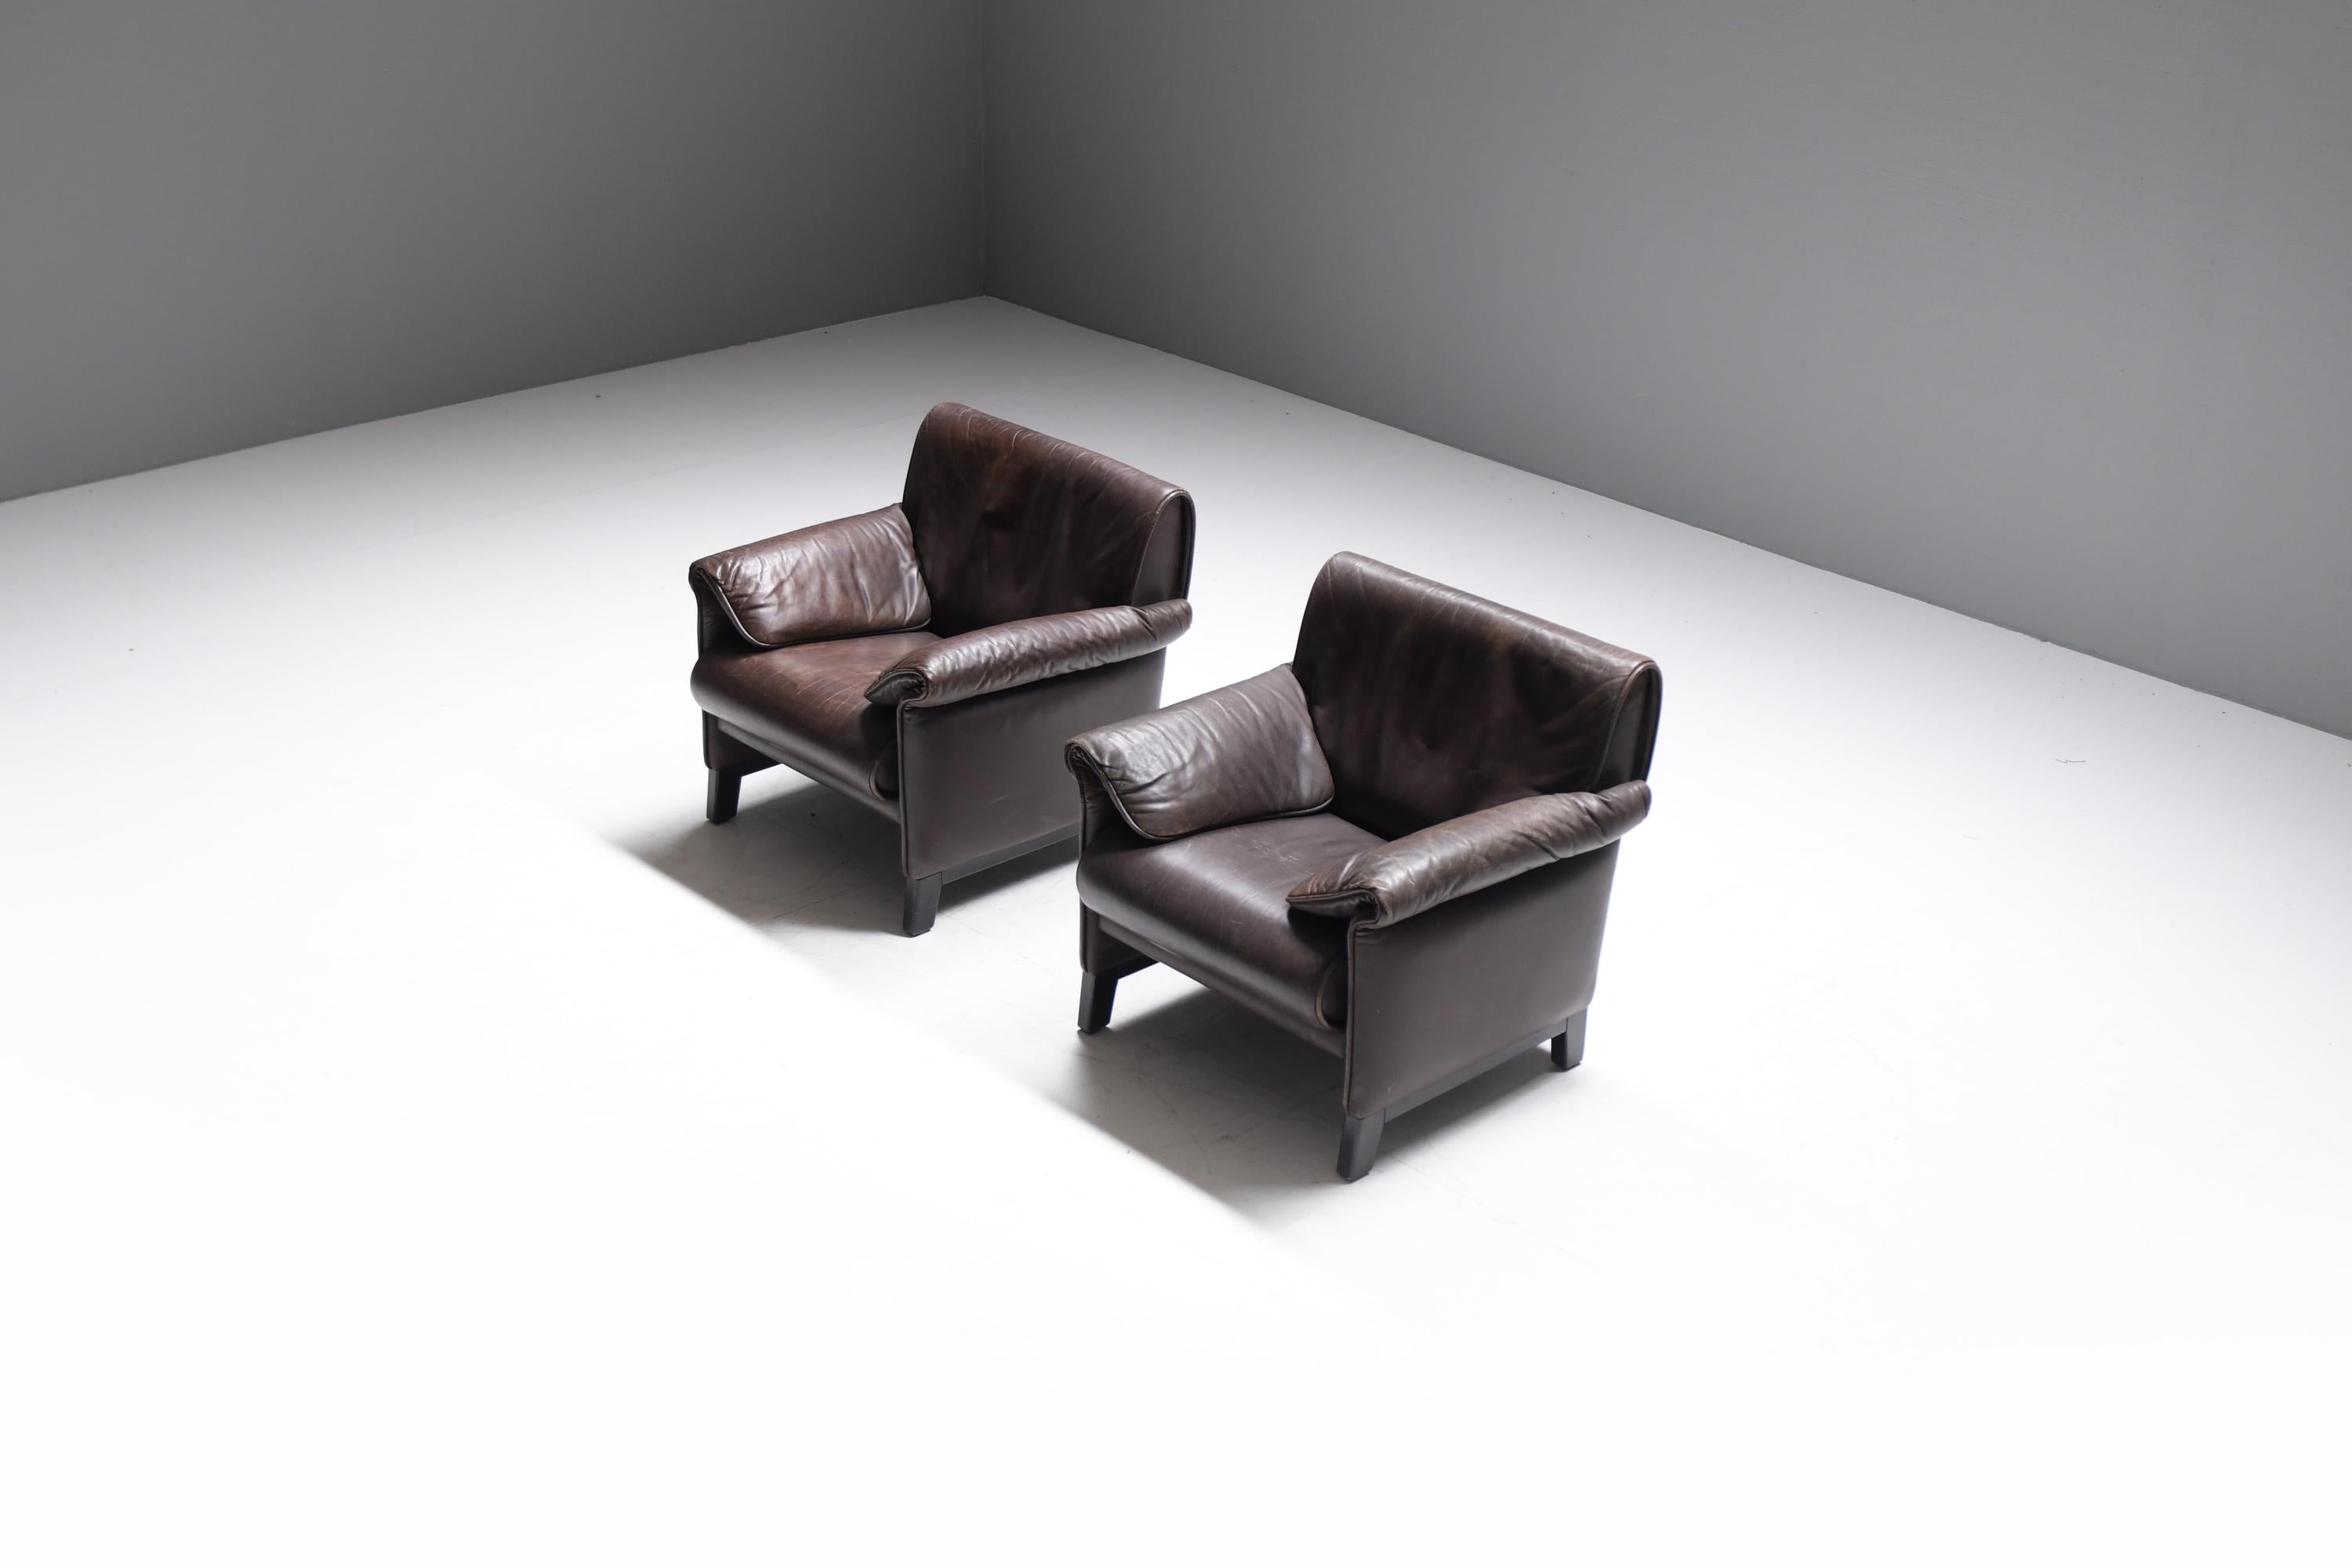 Elegant pair of De Sede 'DS-14' armchairs in a patinated dark brown leather and with a black lacquered wooden base.
Designed in 1989 by Team De Sede and manufactured between 1989 and 1997. 

With a fascinating history of sixty years behind, the